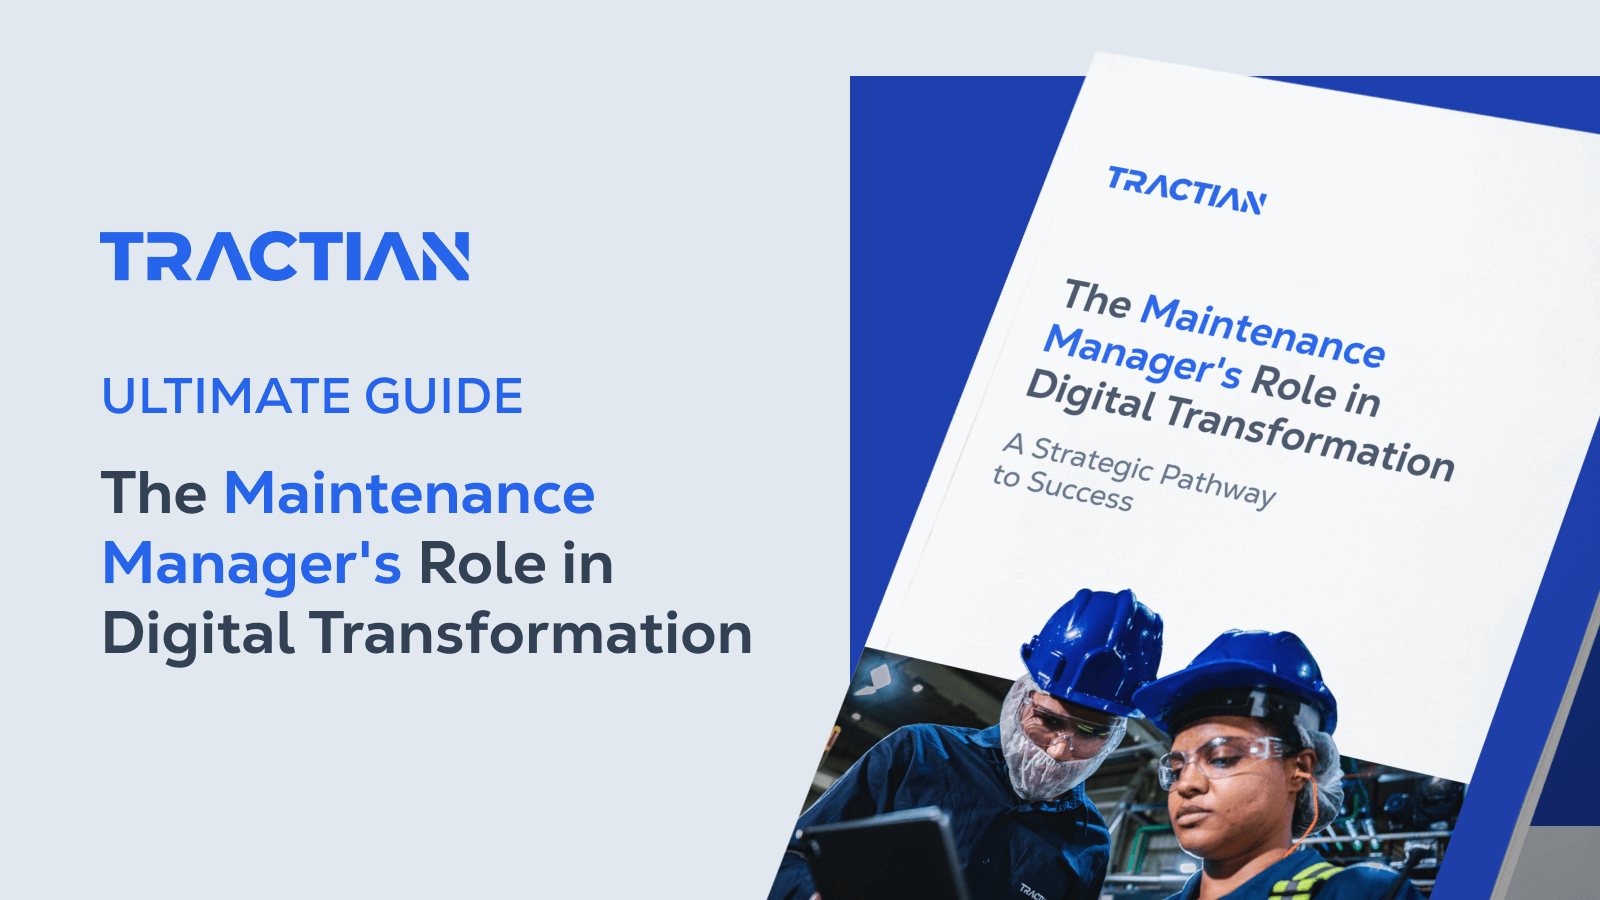 The Maintenance Manager's Role in Digital Transformation